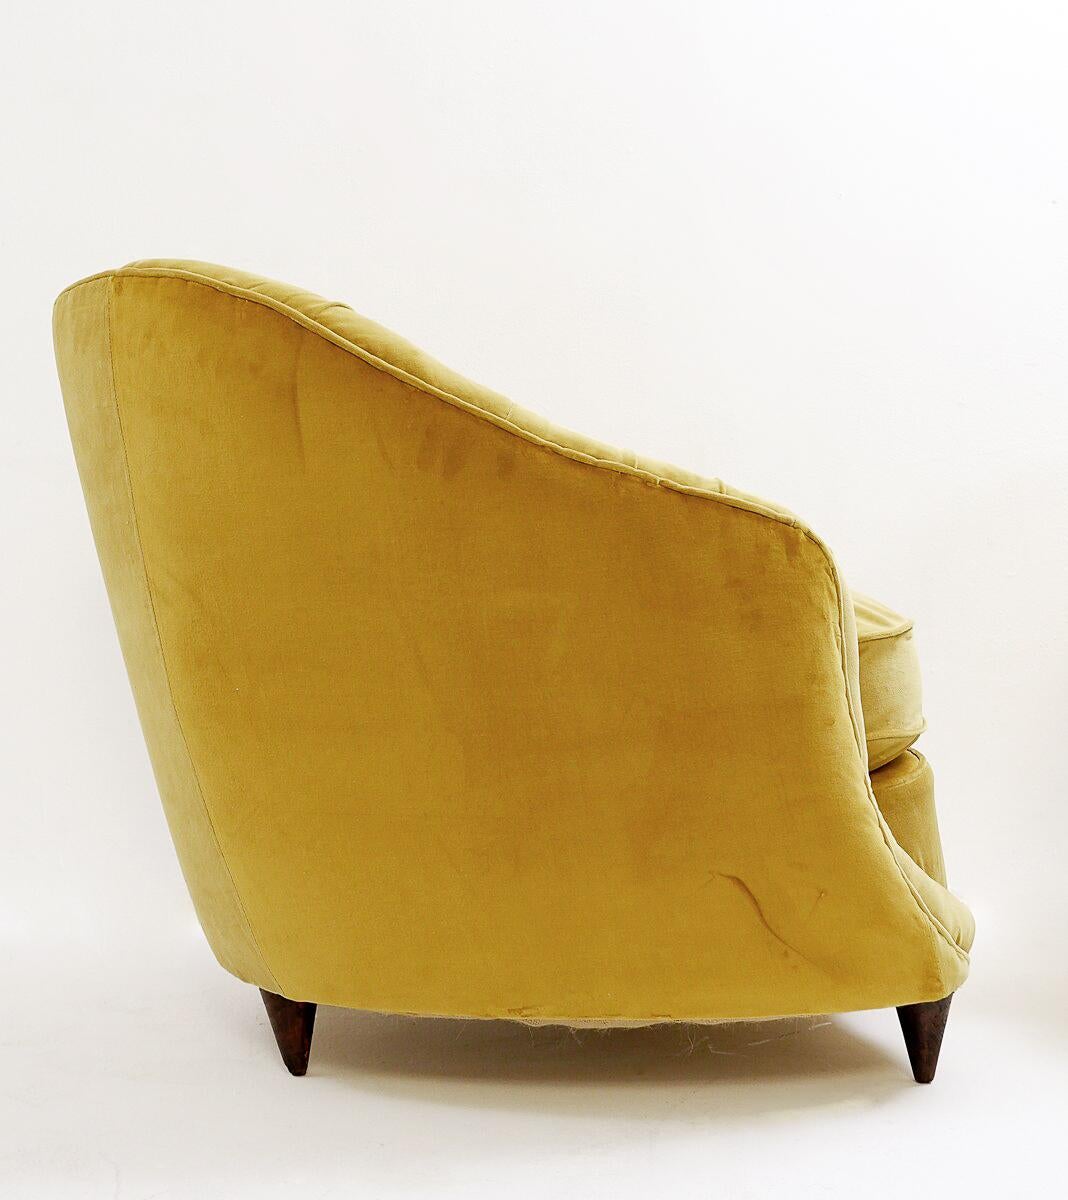  Pair of Velvet Armchairs in the style of Gio Ponti, Italy, 1950s For Sale 2